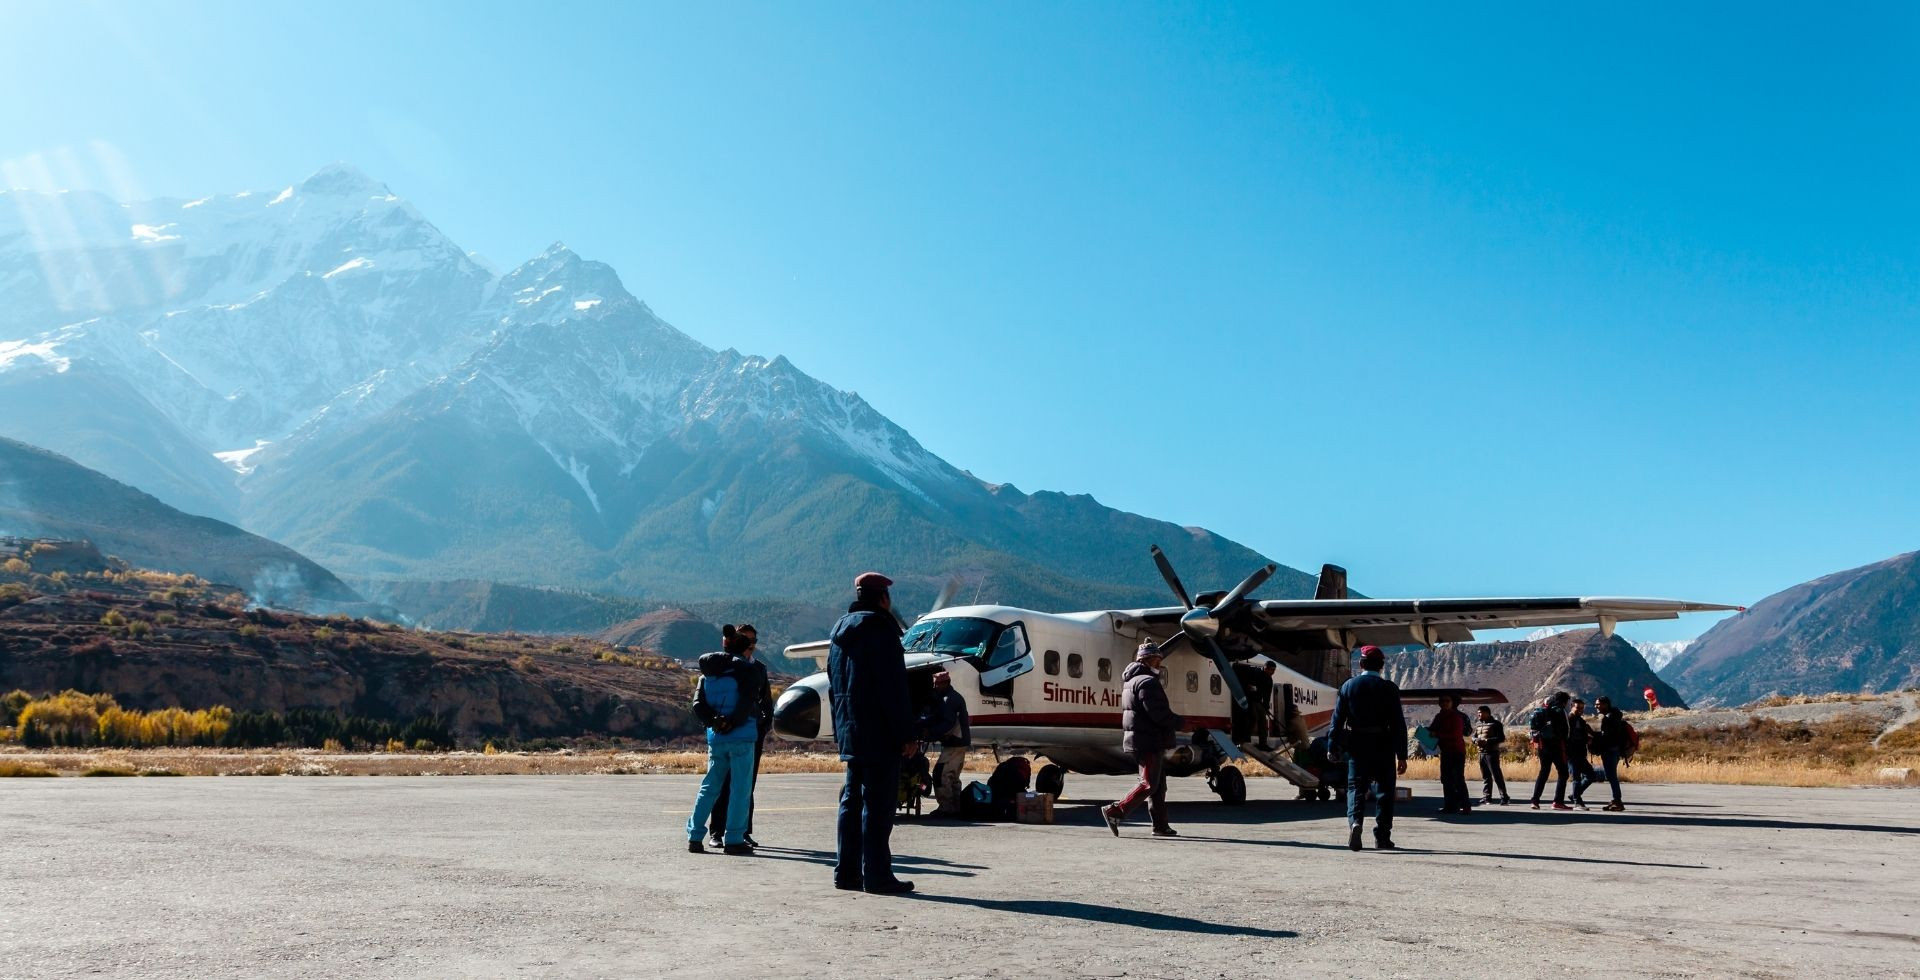 muktinath tour package cost for nepali